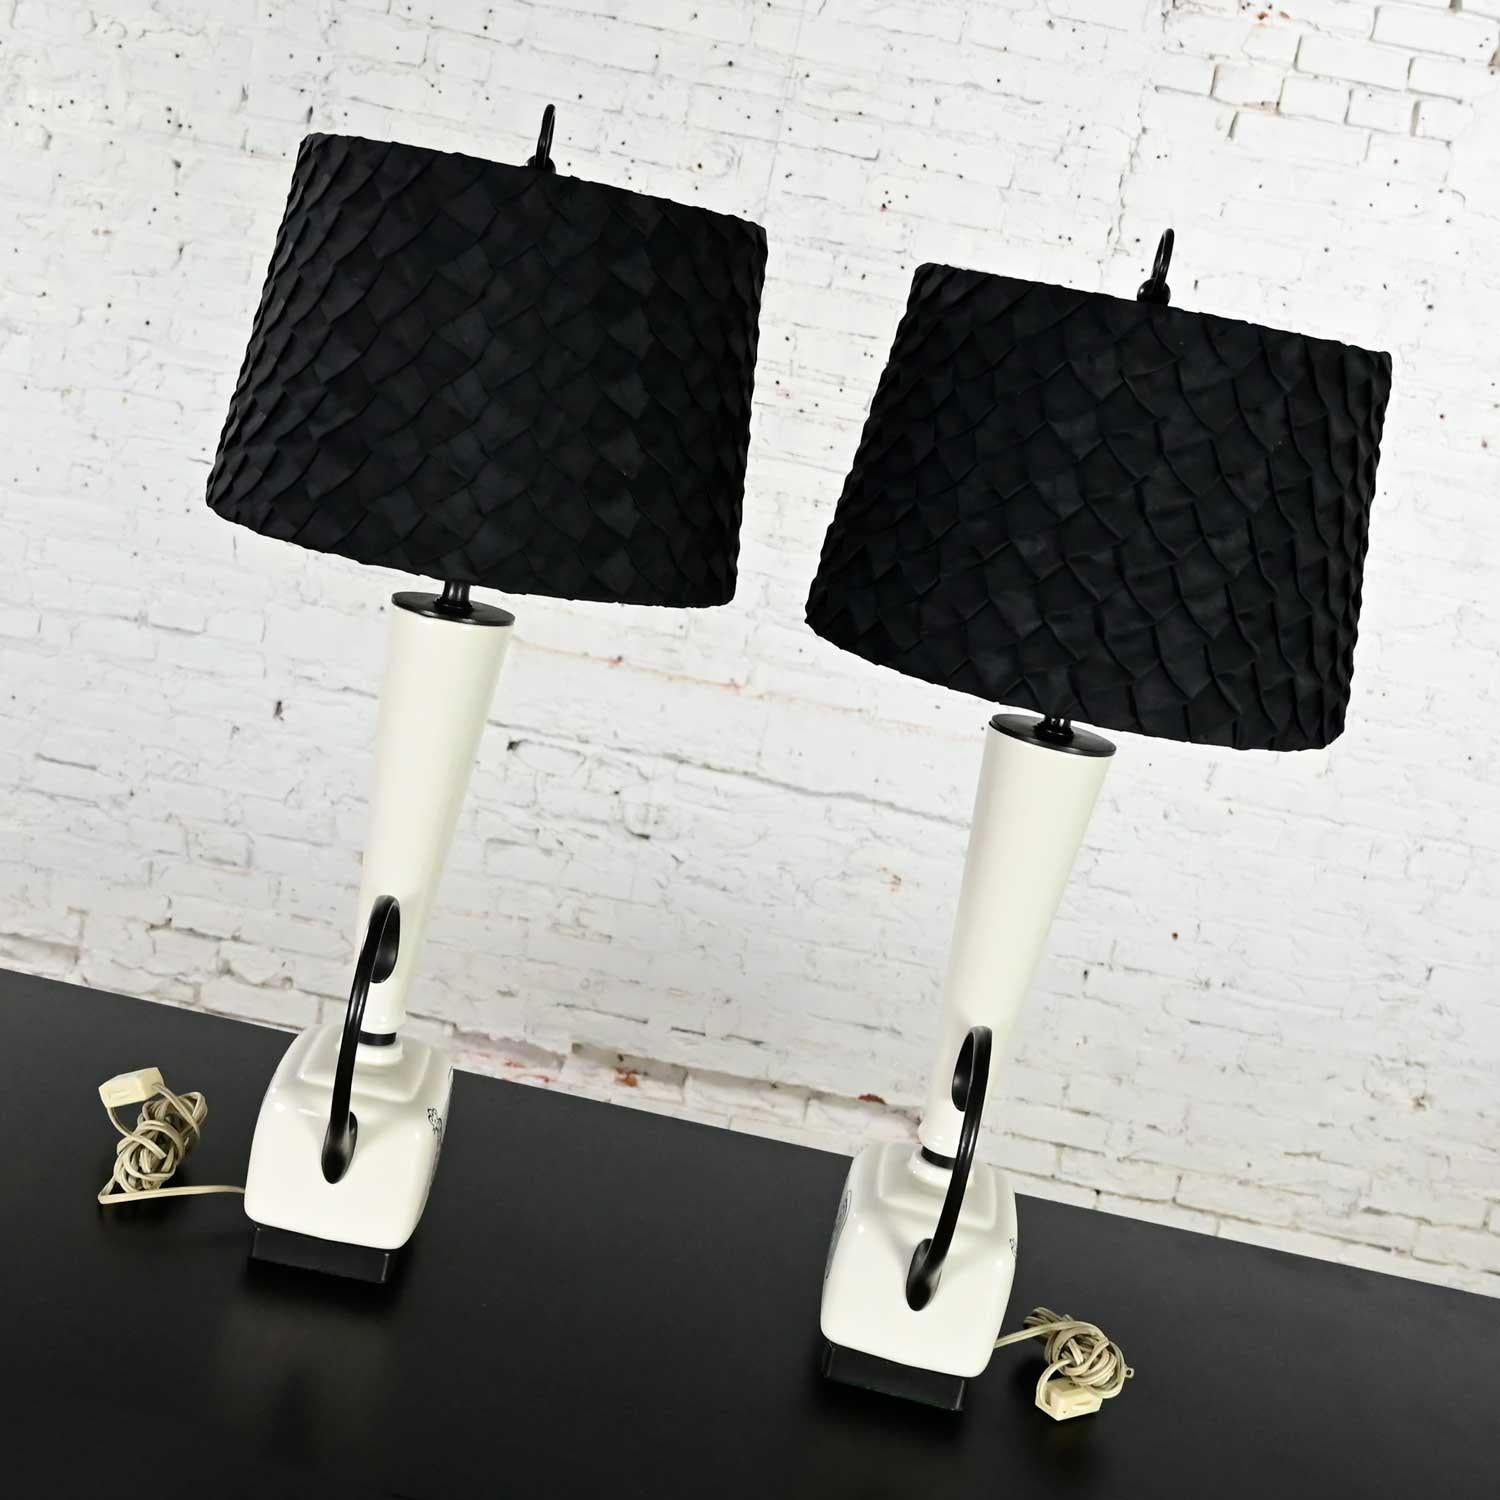 Fabulous Mid-Century Modern black and white ceramic table lamps with rooster design, a pair. Beautiful condition, keeping in mind that these are vintage and not new so will have signs of use and wear. There is a small hairline crack on the back of